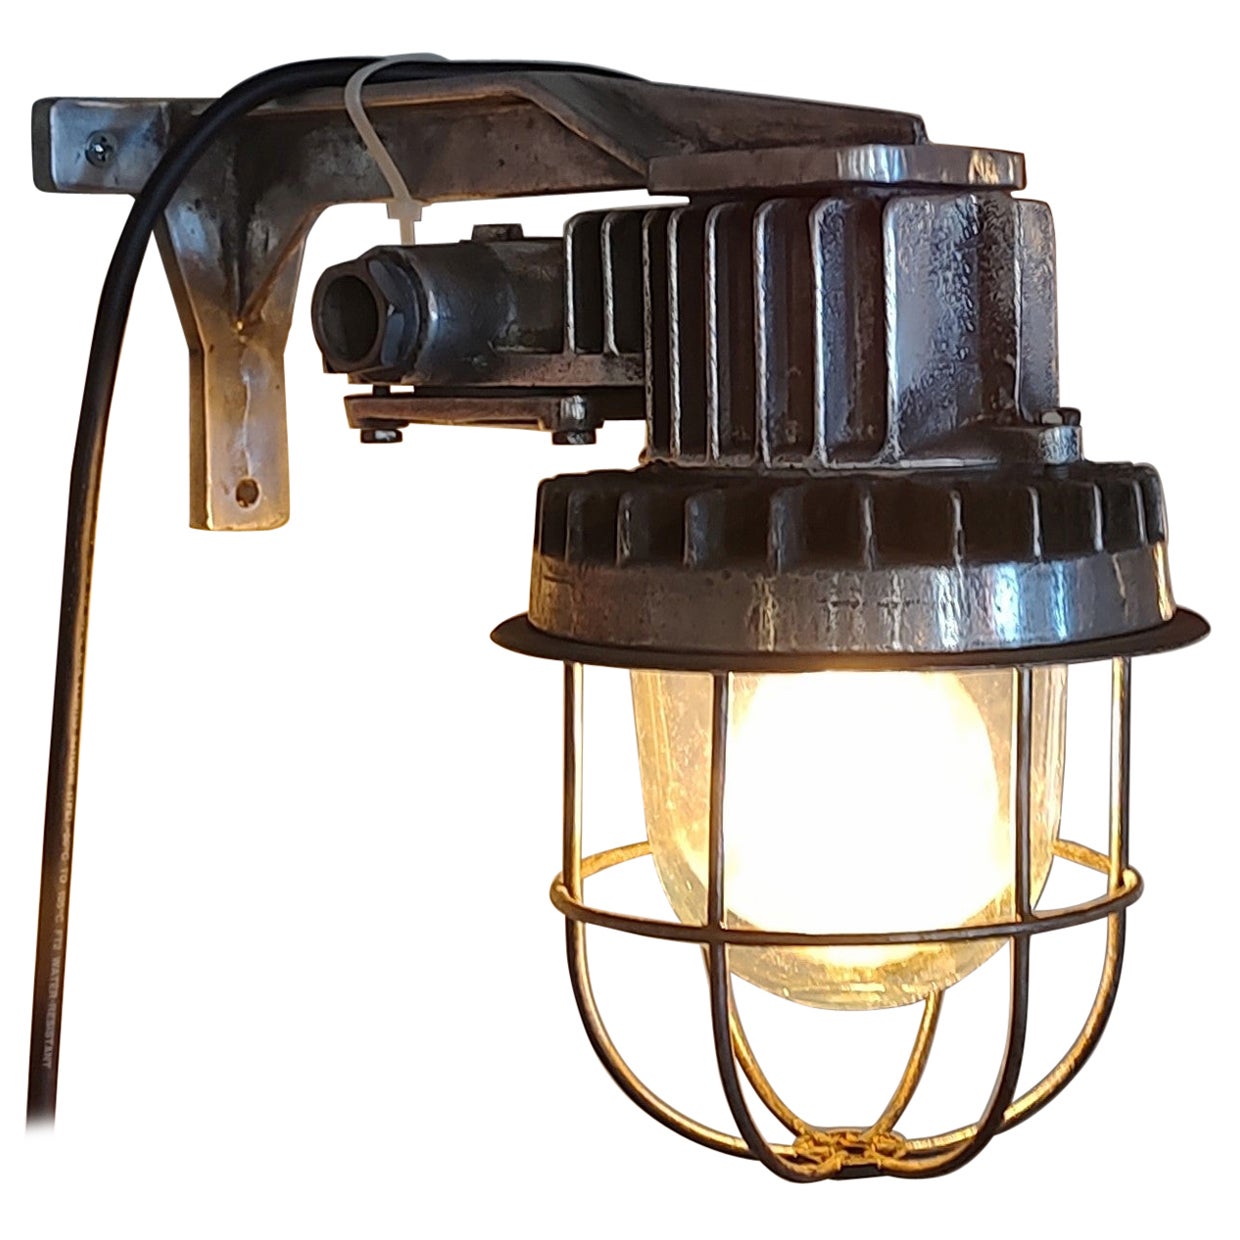 Vintage Industrial Wall Sconce #1 For Sale